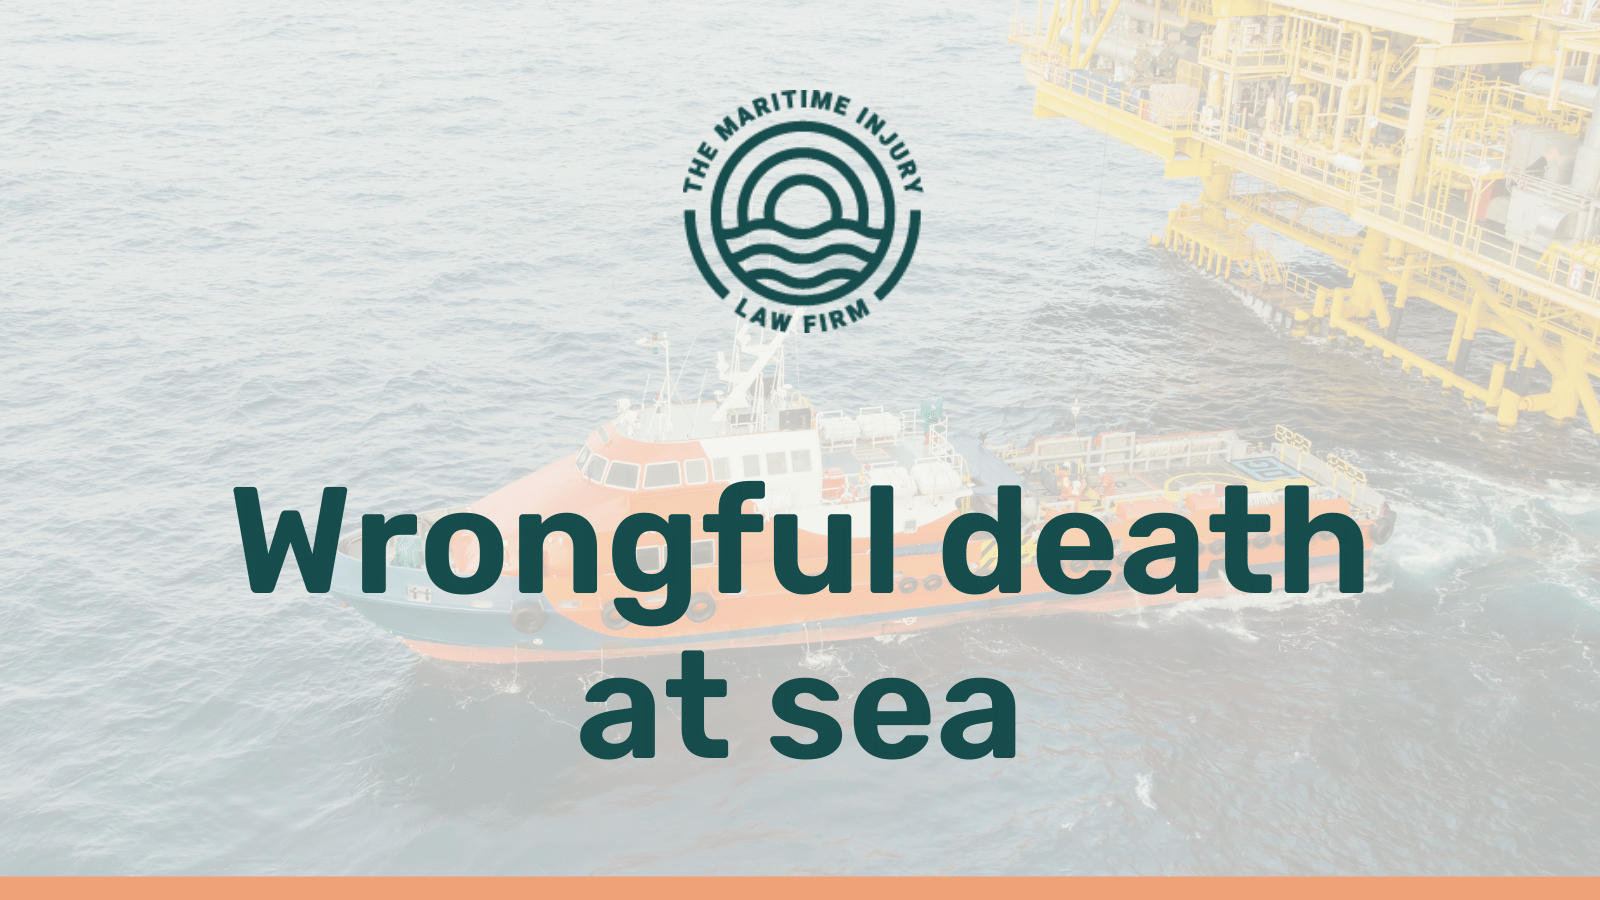 Wrongful death at sea louisiana - maritime injury law firm - George Vourvoulias